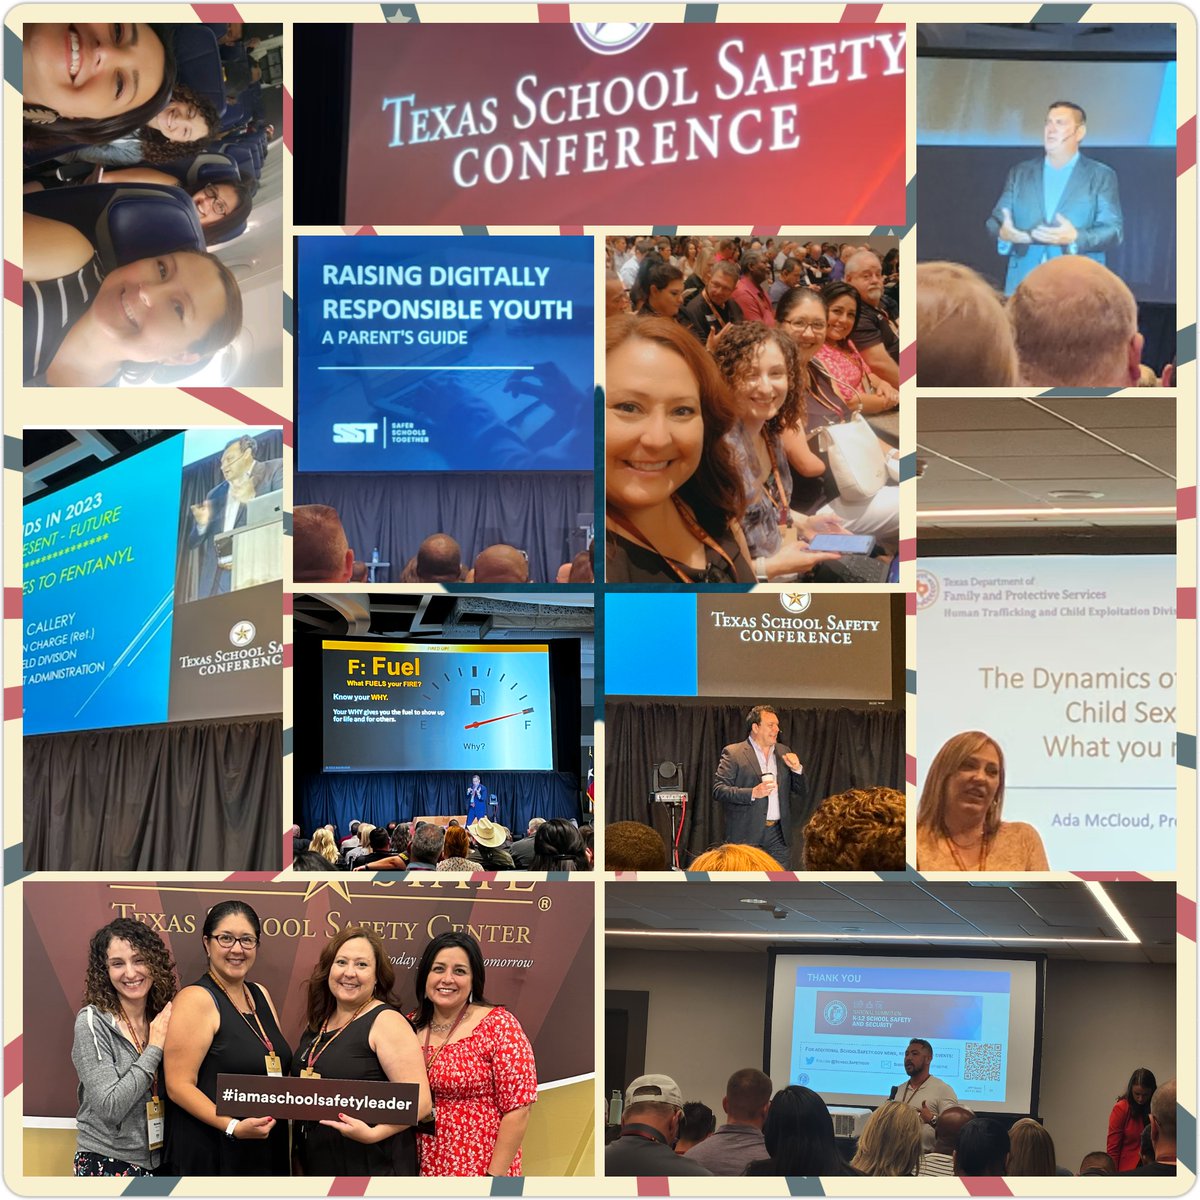 Thank you for a great learning experience @TxSchoolSafety Looking forward to sharing more strategies on keeping students safe. @Del_Valle_MS @vronicasworld @SchoolSafetyGov @YsletaISD @rm_cere @DrMARamos #ForgeTheFuture #OFOD @YISD_Security @itsyourship @AricBostick Mr. J.Callery